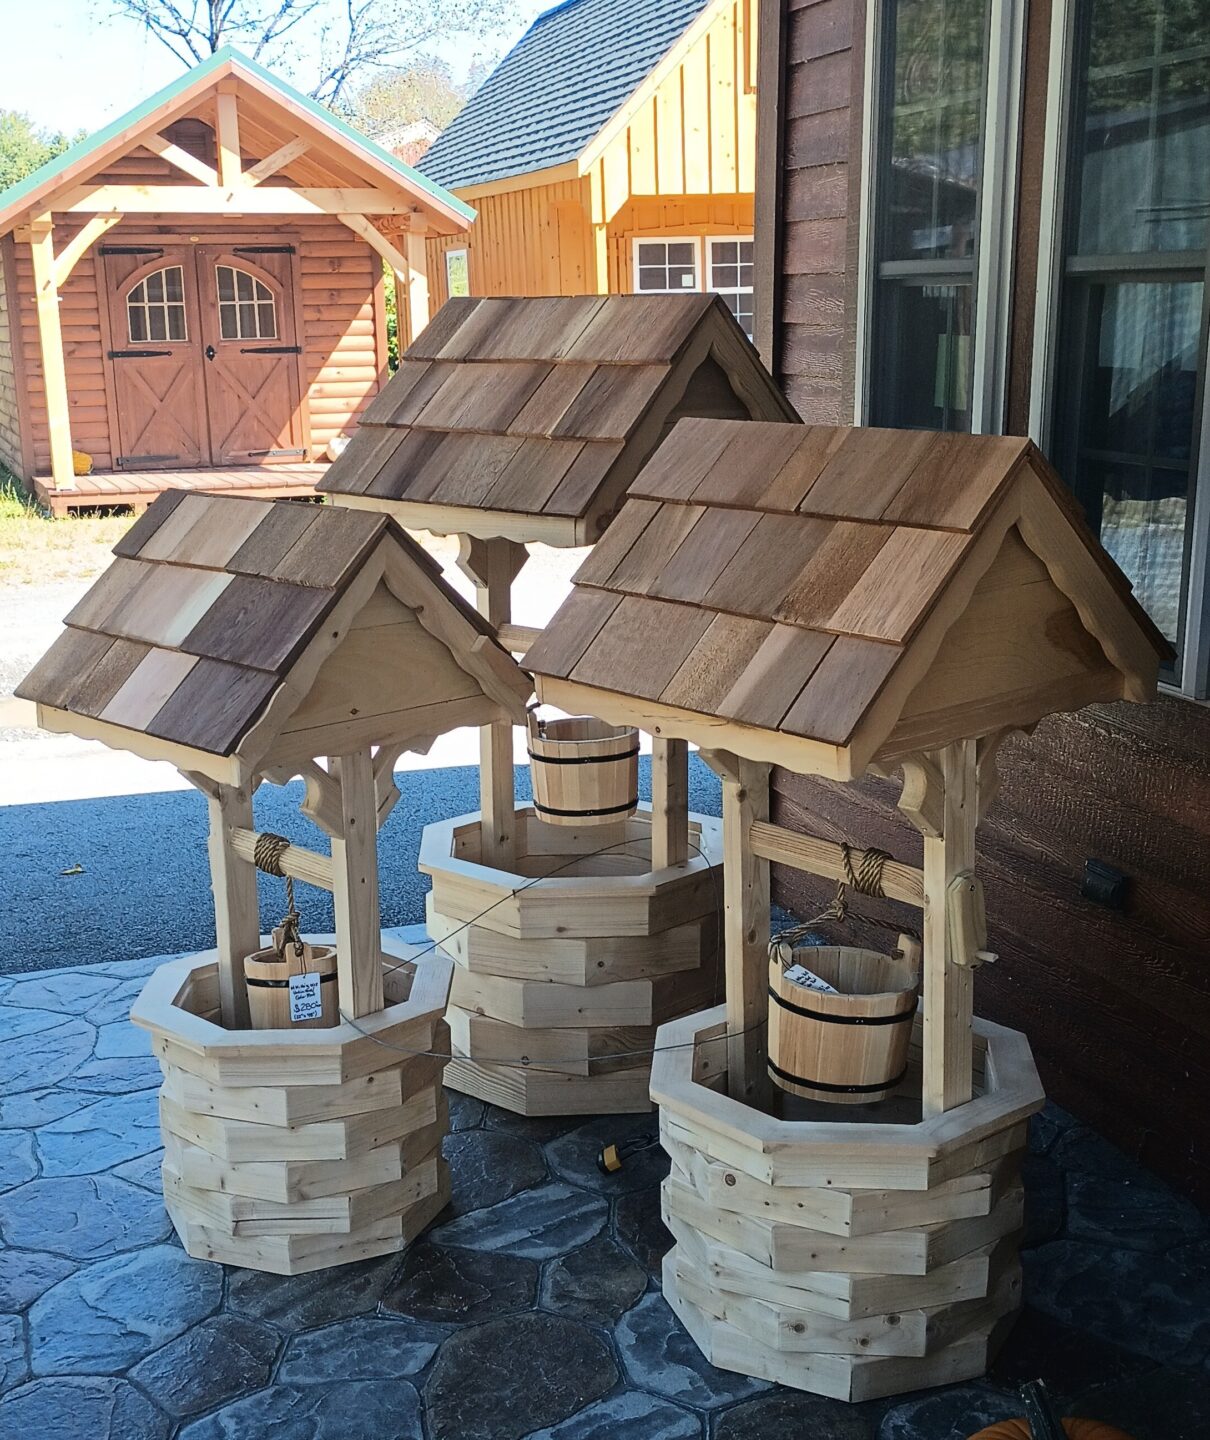 Wooden wishing wells of different sizes